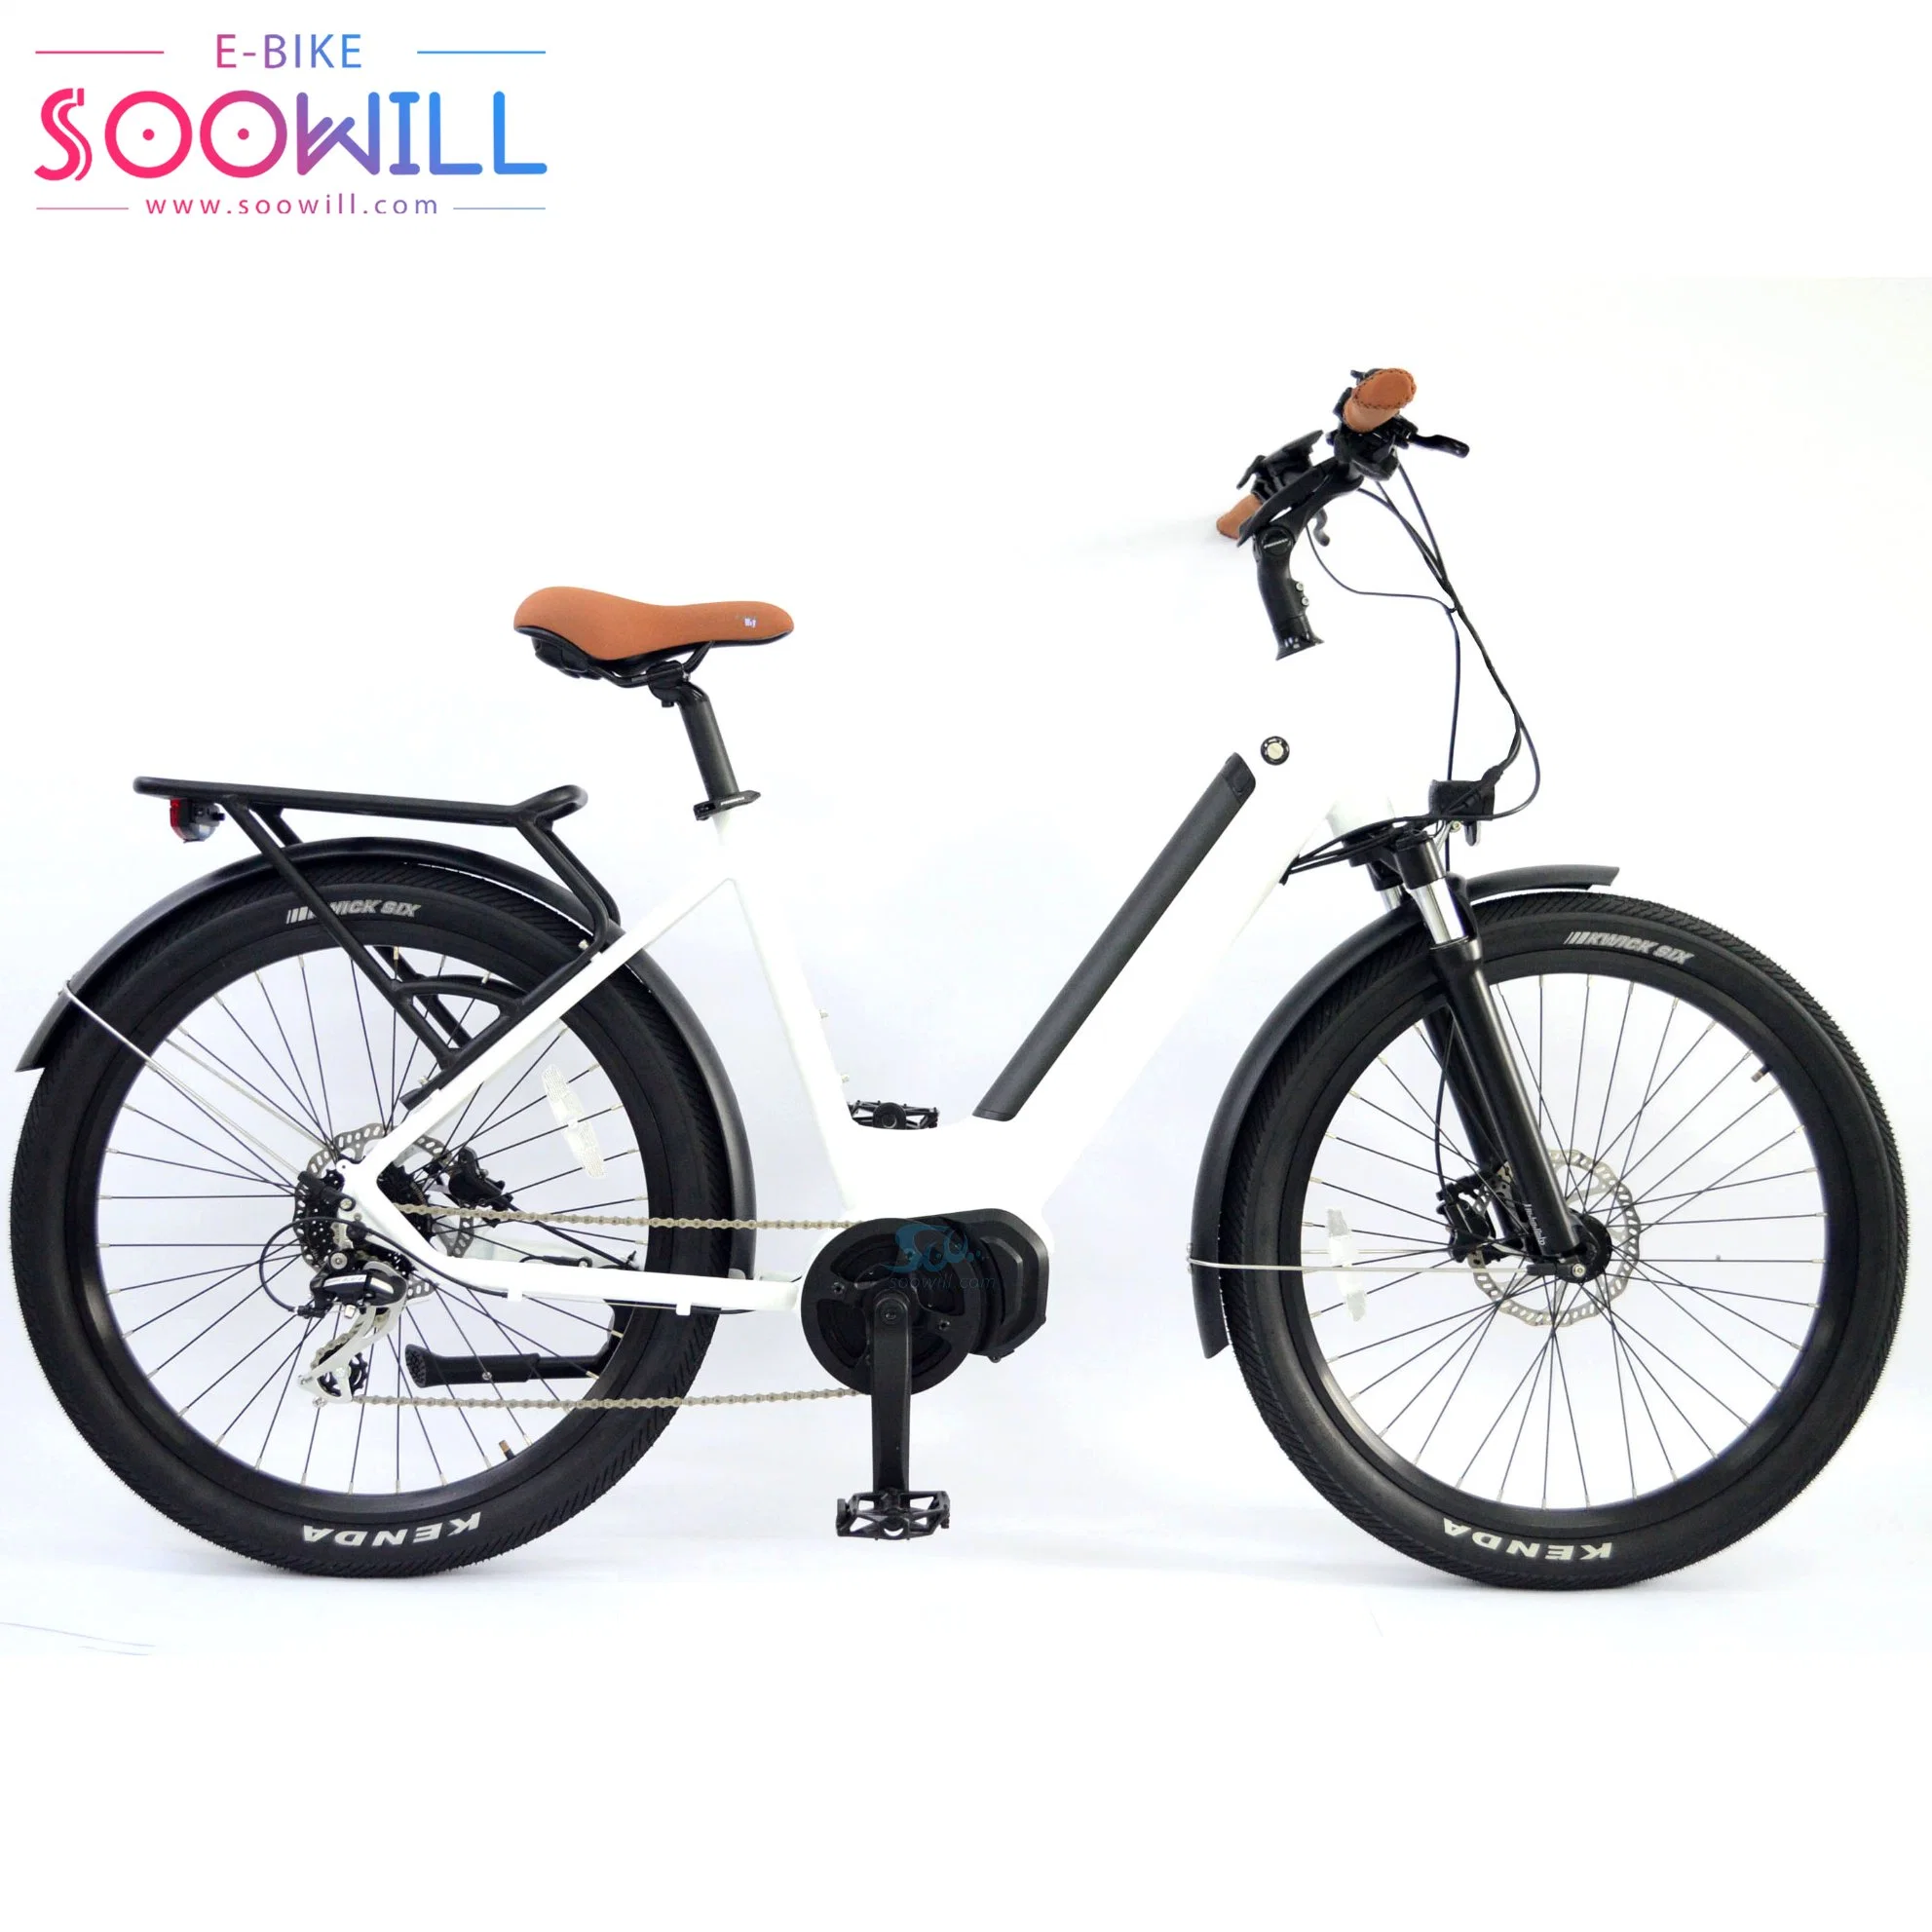 13ah Basket Road Lithium Battery for Electric Bike 6061 Aluminium Alloy, Customized Color Frame Ebike